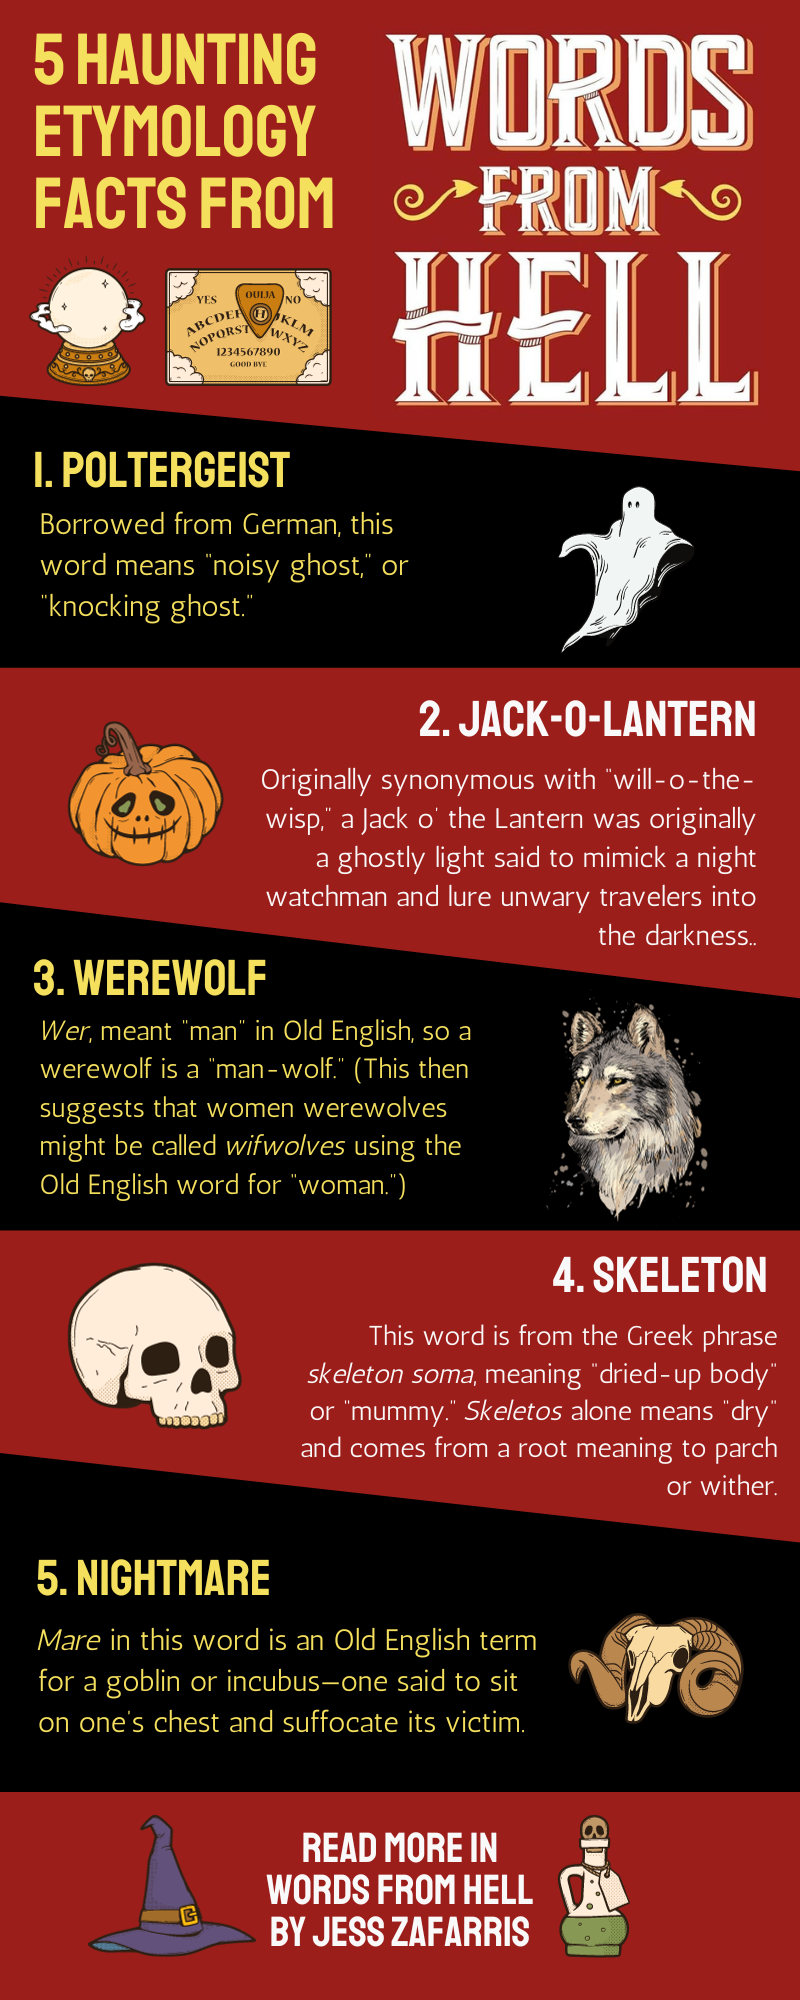 An infographic detailing haunting word origin facts from WORDS FROM HELL. TEXT: POLTERGEIST Borrowed from German, this word means, means "noisy ghost," or "knocking ghost." 2. JACK-O-LANTERN Originally synonymous with "will-o-the-wisp," a Jack o' the Lantern was originally a ghostly light said to mimick a night watchman and lure unwary travelers into the darkness.. 3. WEREWOLF Wer, meant "man" in Old English, so a werewolf is a "man-wolf." This then implies the existence of female werewolves called wifwolves using the Old English word for "woman. 4. SKELETON This word is from the Greek phrase skeleton soma, meaning "dried-up body' or "mummy." Skeletos alone means "dry and comes from a root meaning to parch or wither. 5. NIGHTMARE Mare in this word is an Old English term for a goblin or incubus-one said to sit on one's chest and suffocate its victim. READ MORE IN WORDS FROM HELL BY JESS ZAFARRIS